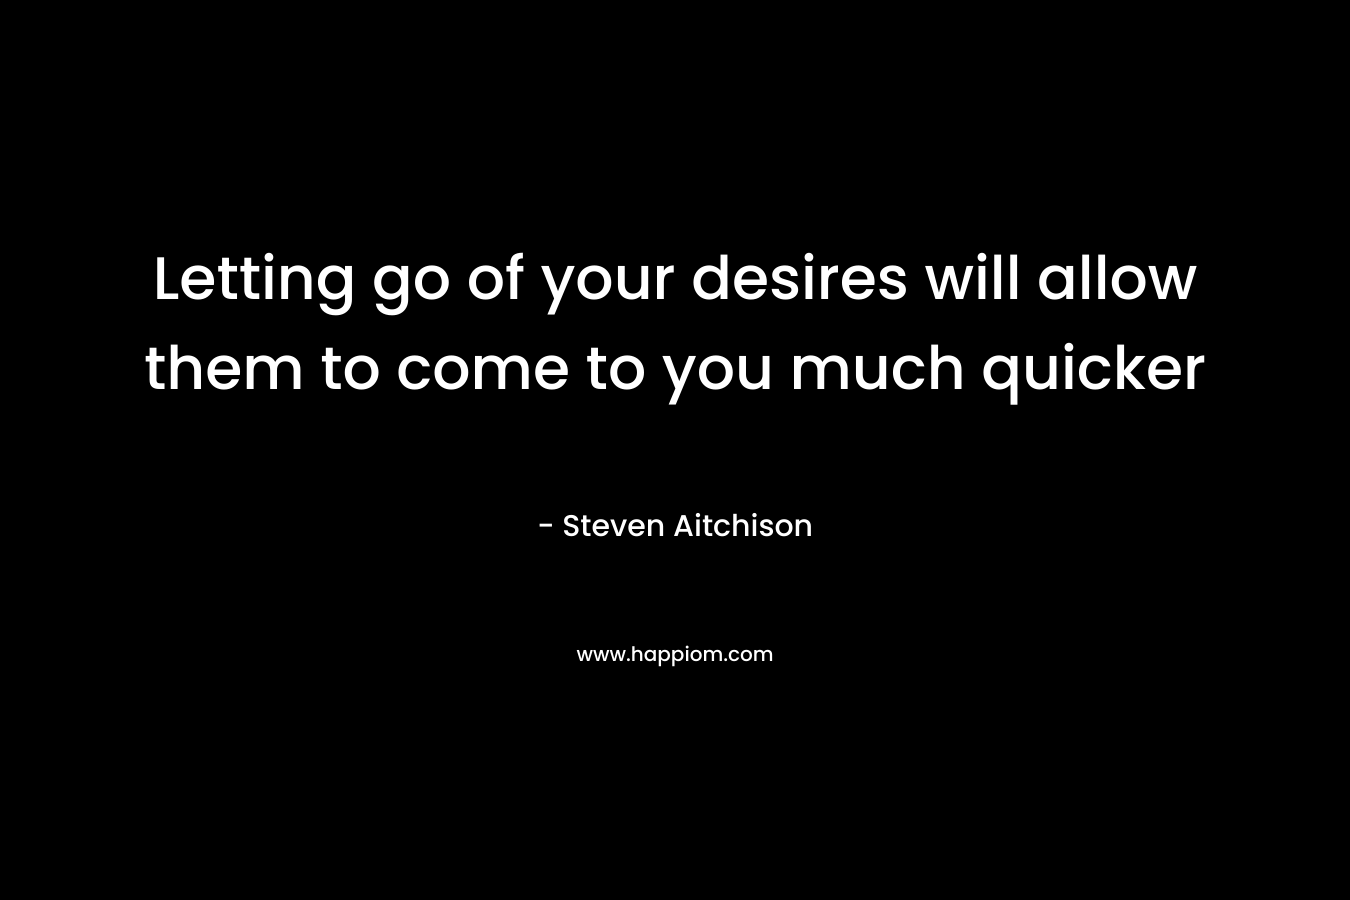 Letting go of your desires will allow them to come to you much quicker